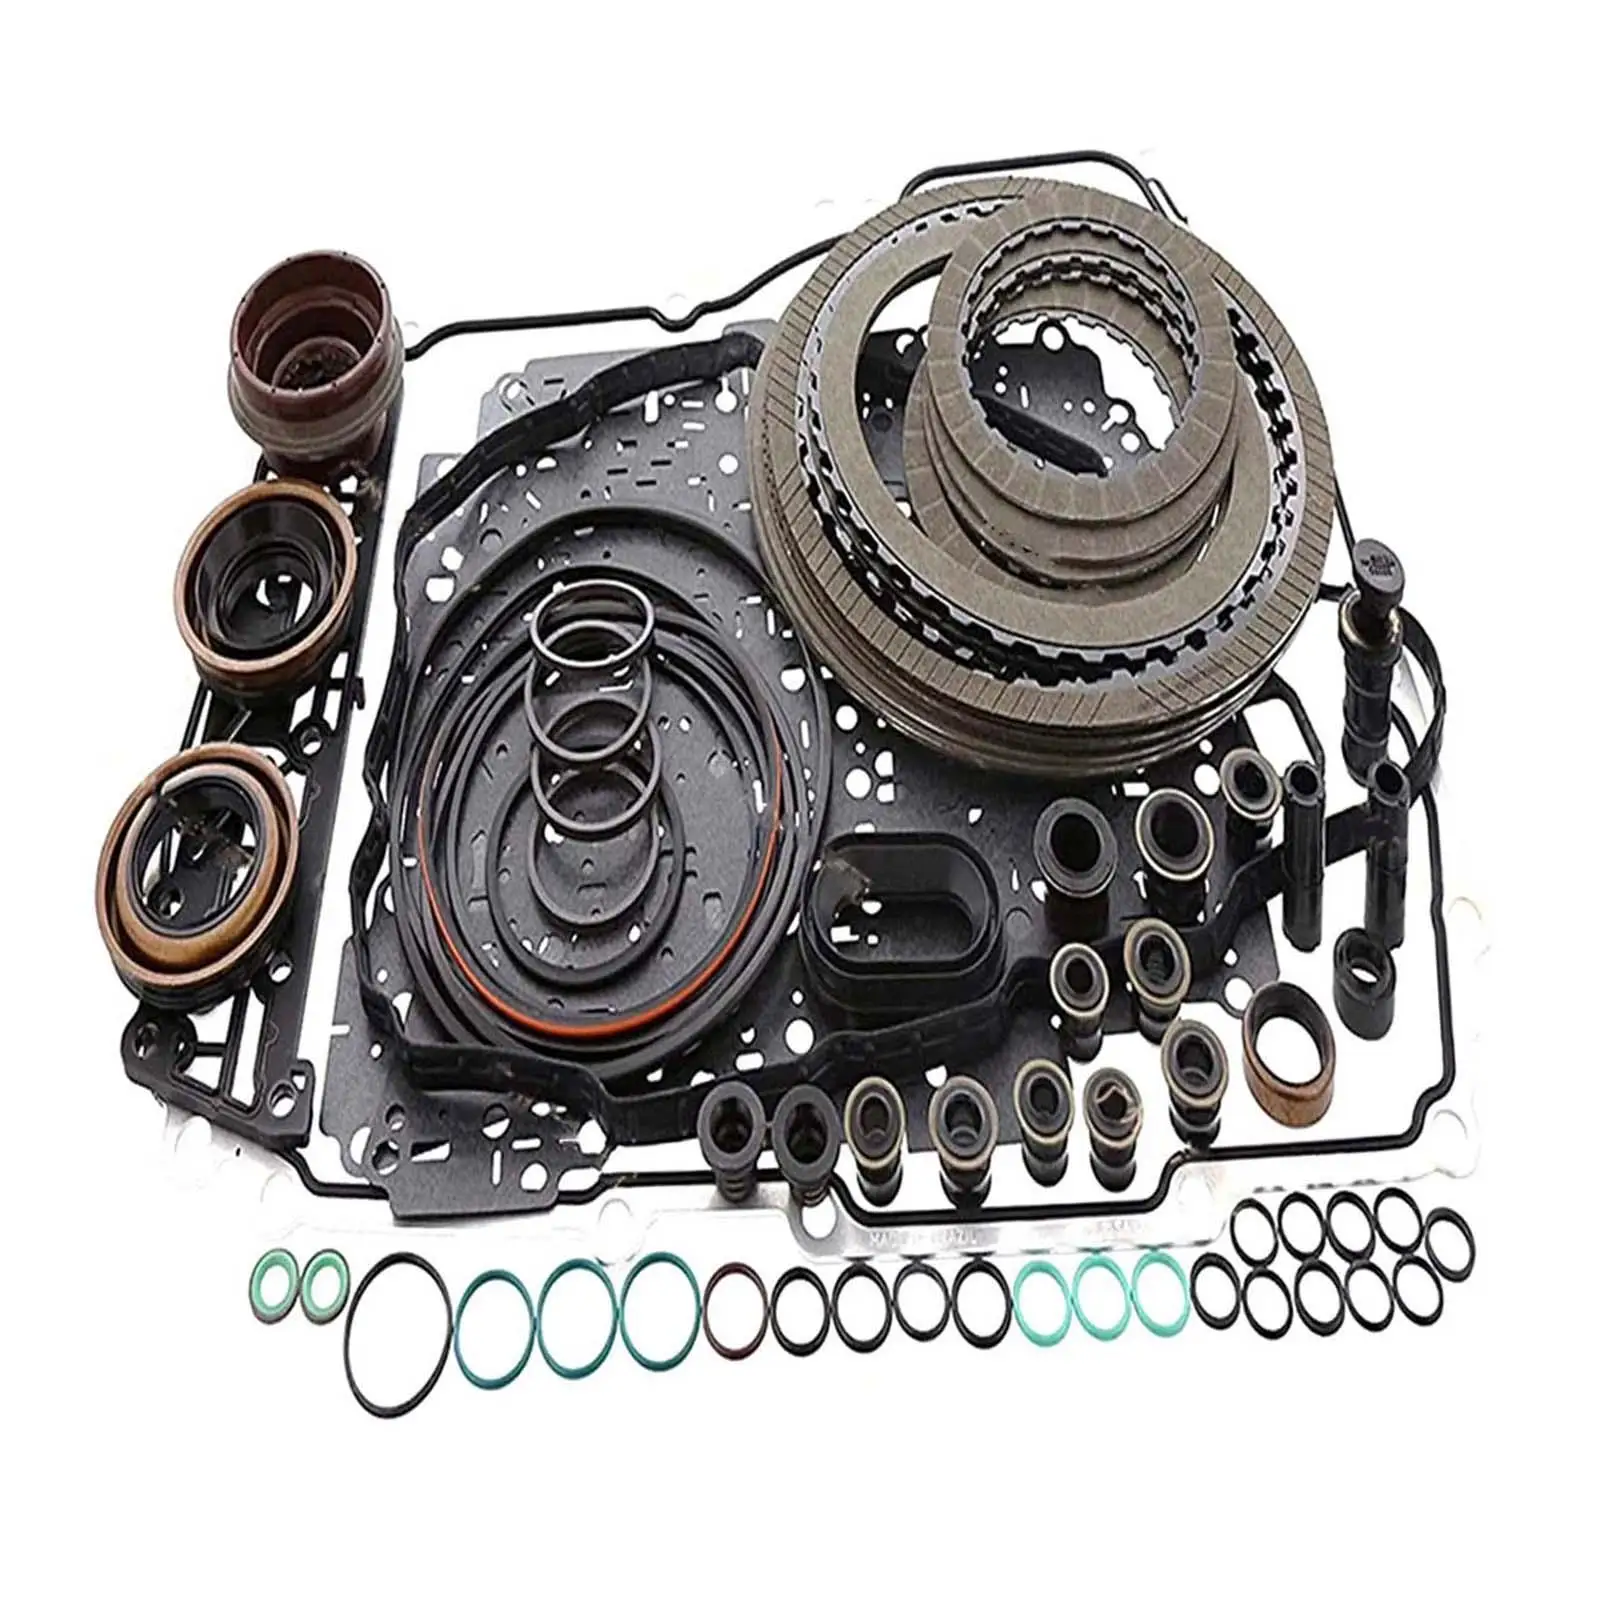 6T40E 6T45E Transmission Overhaul Set Direct Replacement for Buick